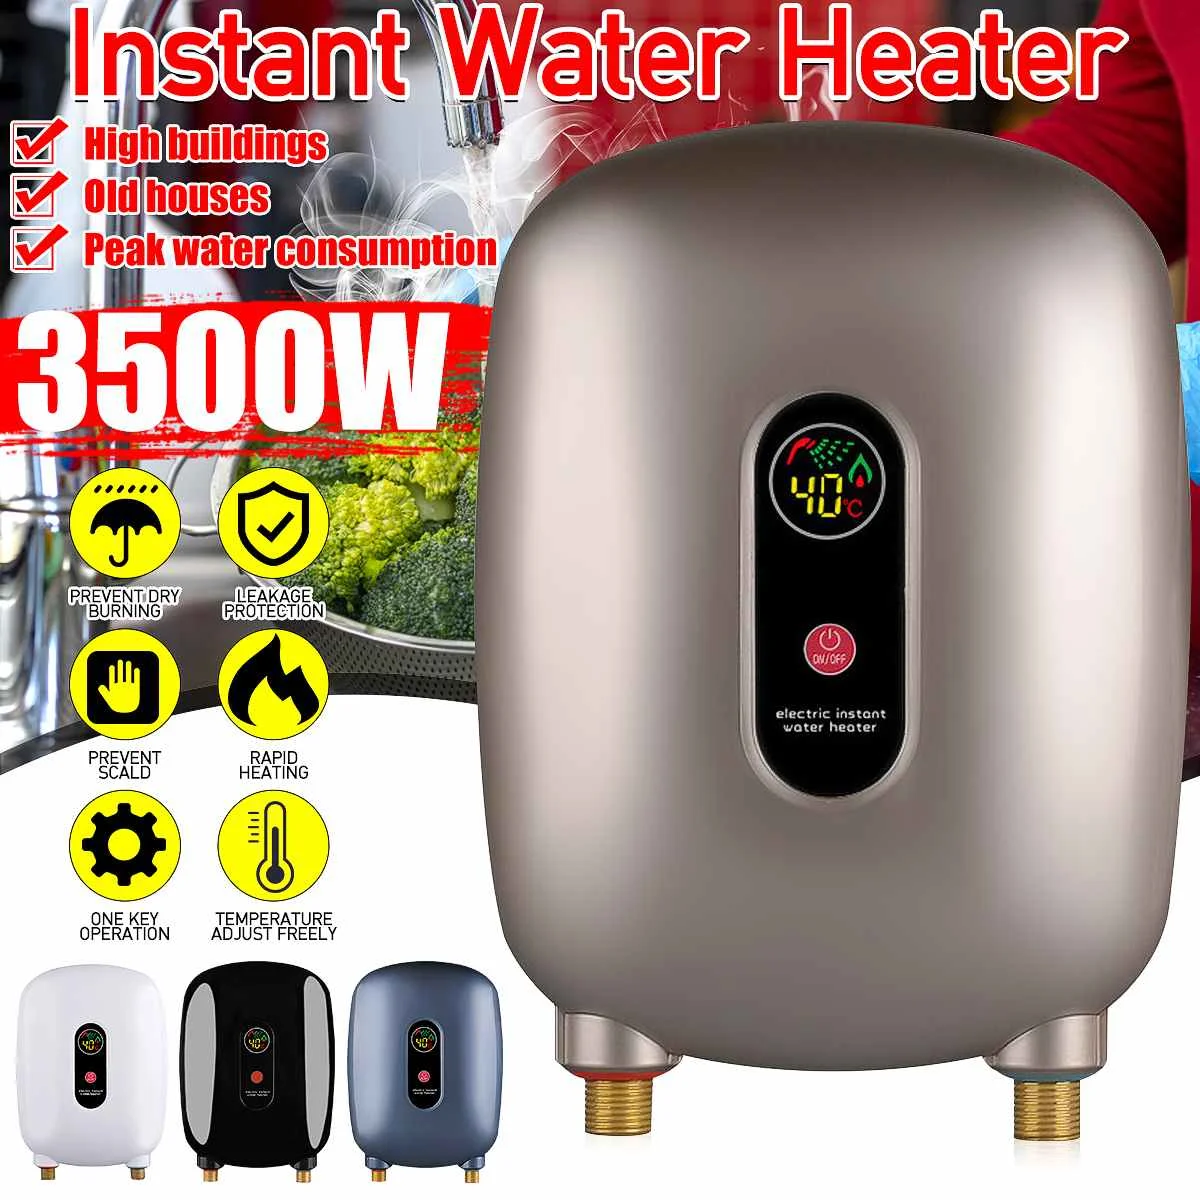 

3500W 110V Electric Water Heater Instant Water Heating High Pressure High building Old house apply Portable Home Water Heaters